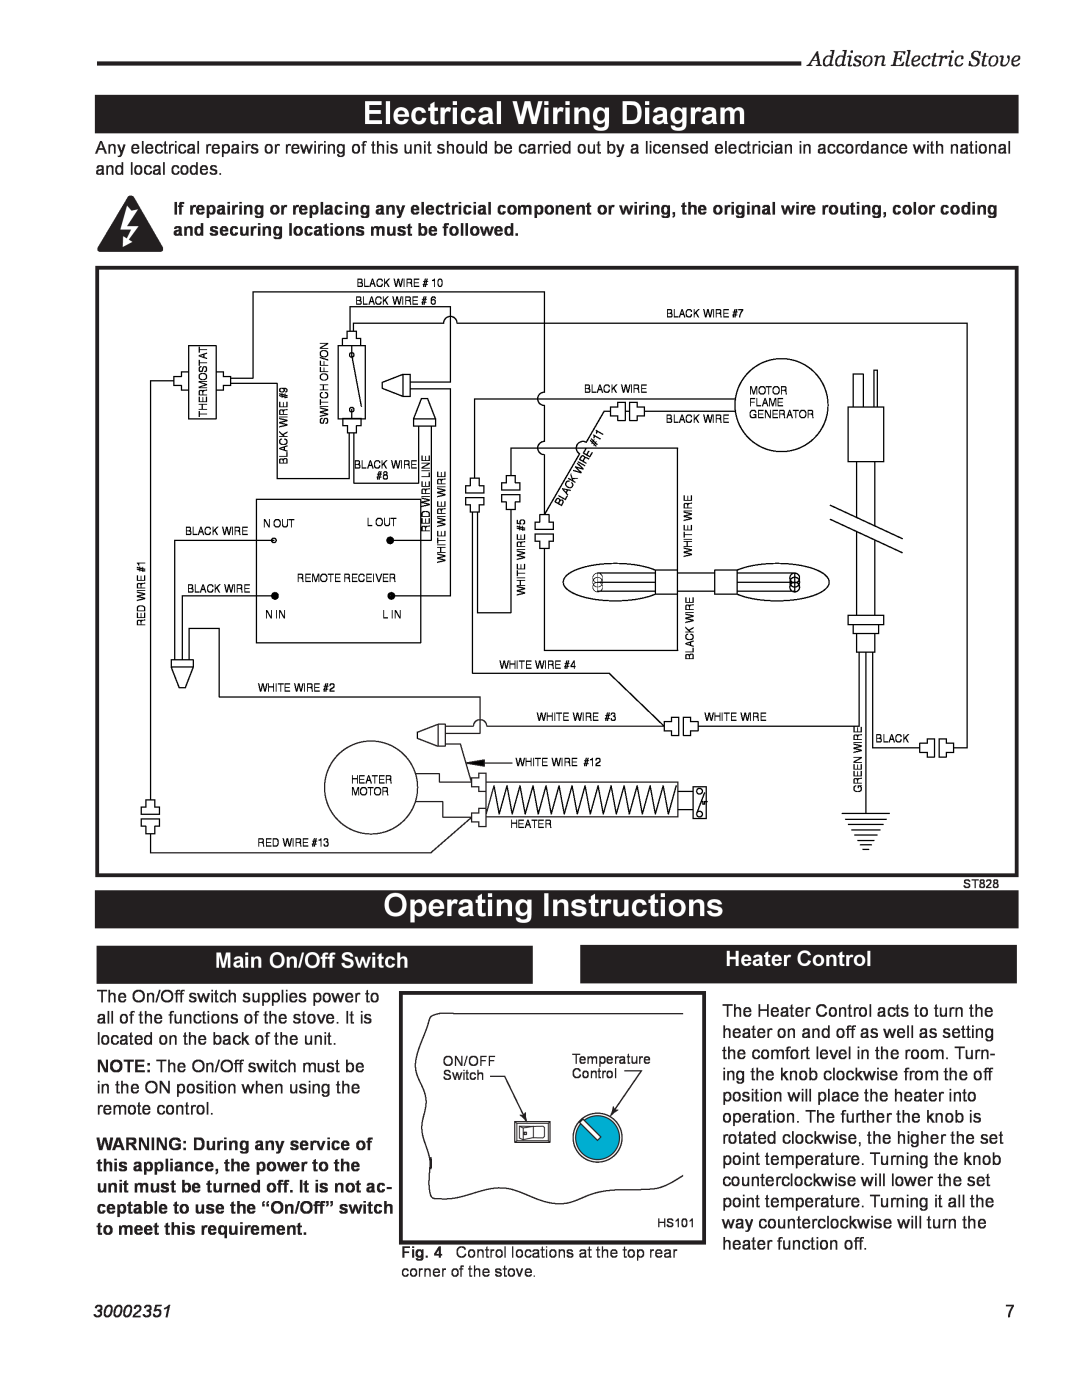 Vermont Casting ACSB ACSM Electrical Wiring Diagram, Operating Instructions, Main On/Off Switch, Heater Control, 30002351 